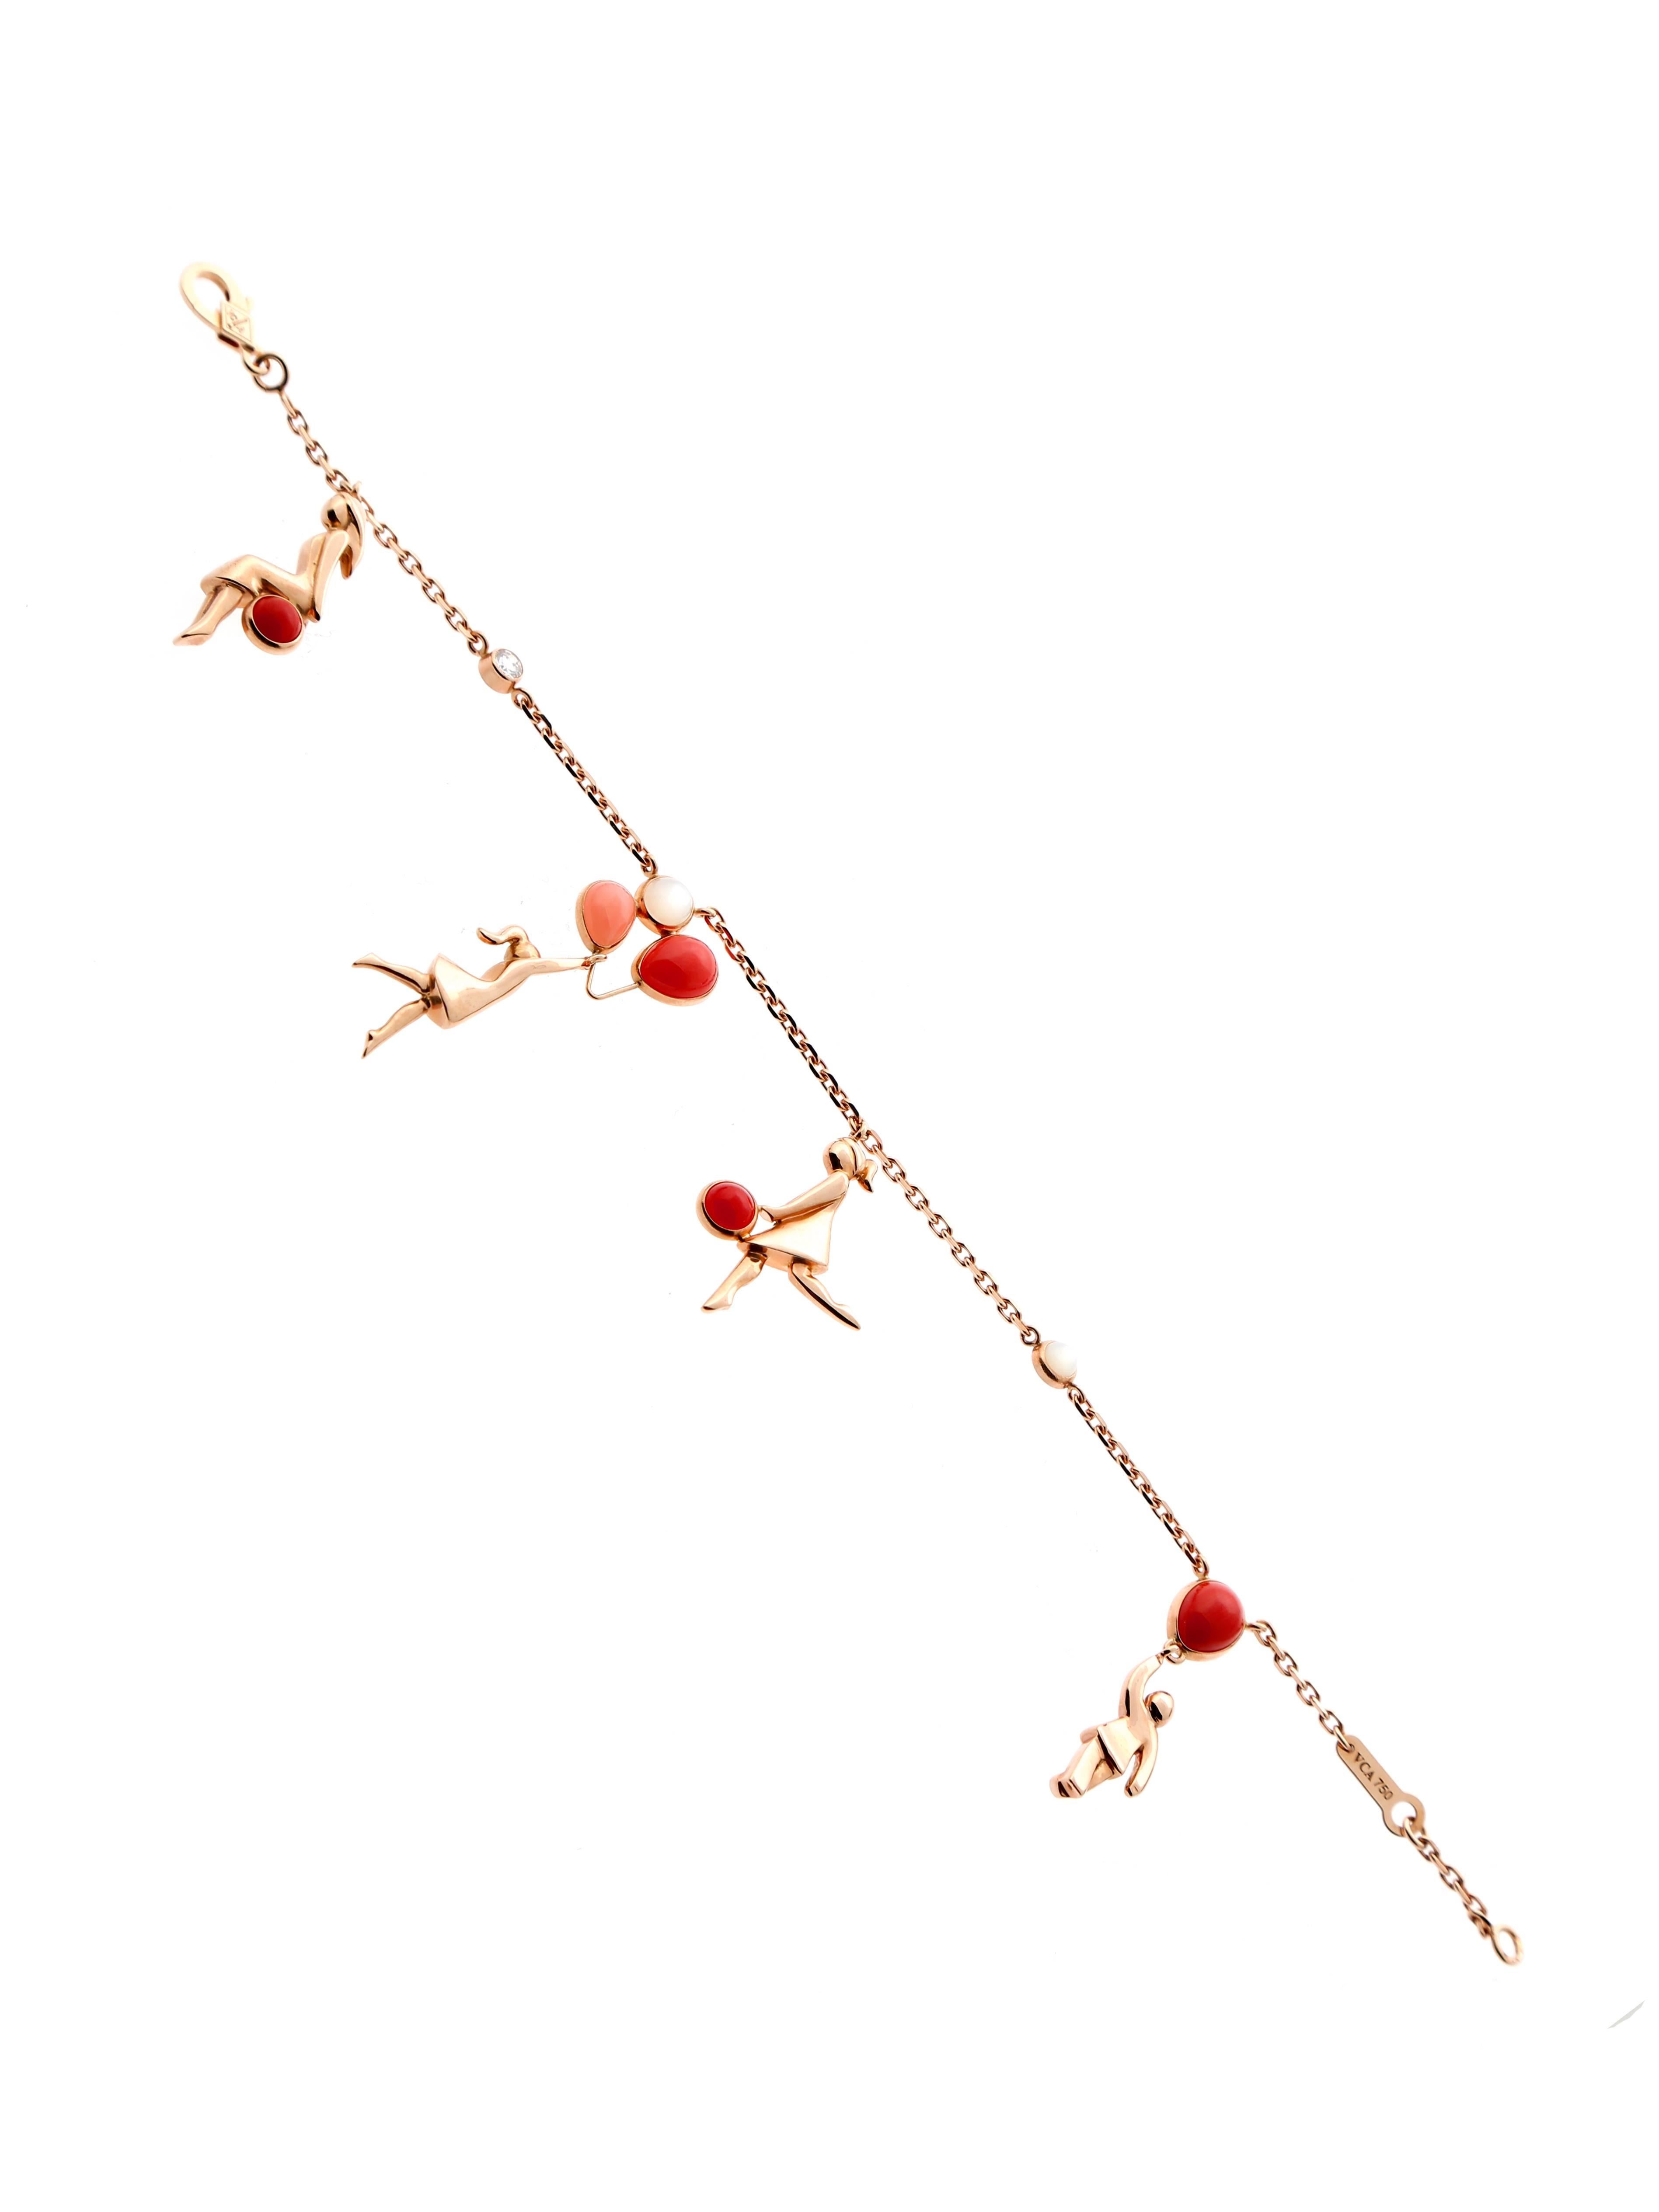 A chic bracelet by Van Cleef & Arpels featuring coral, moonstone and a diamond crafted in 18k rose gold. The bracelet measures 6.5